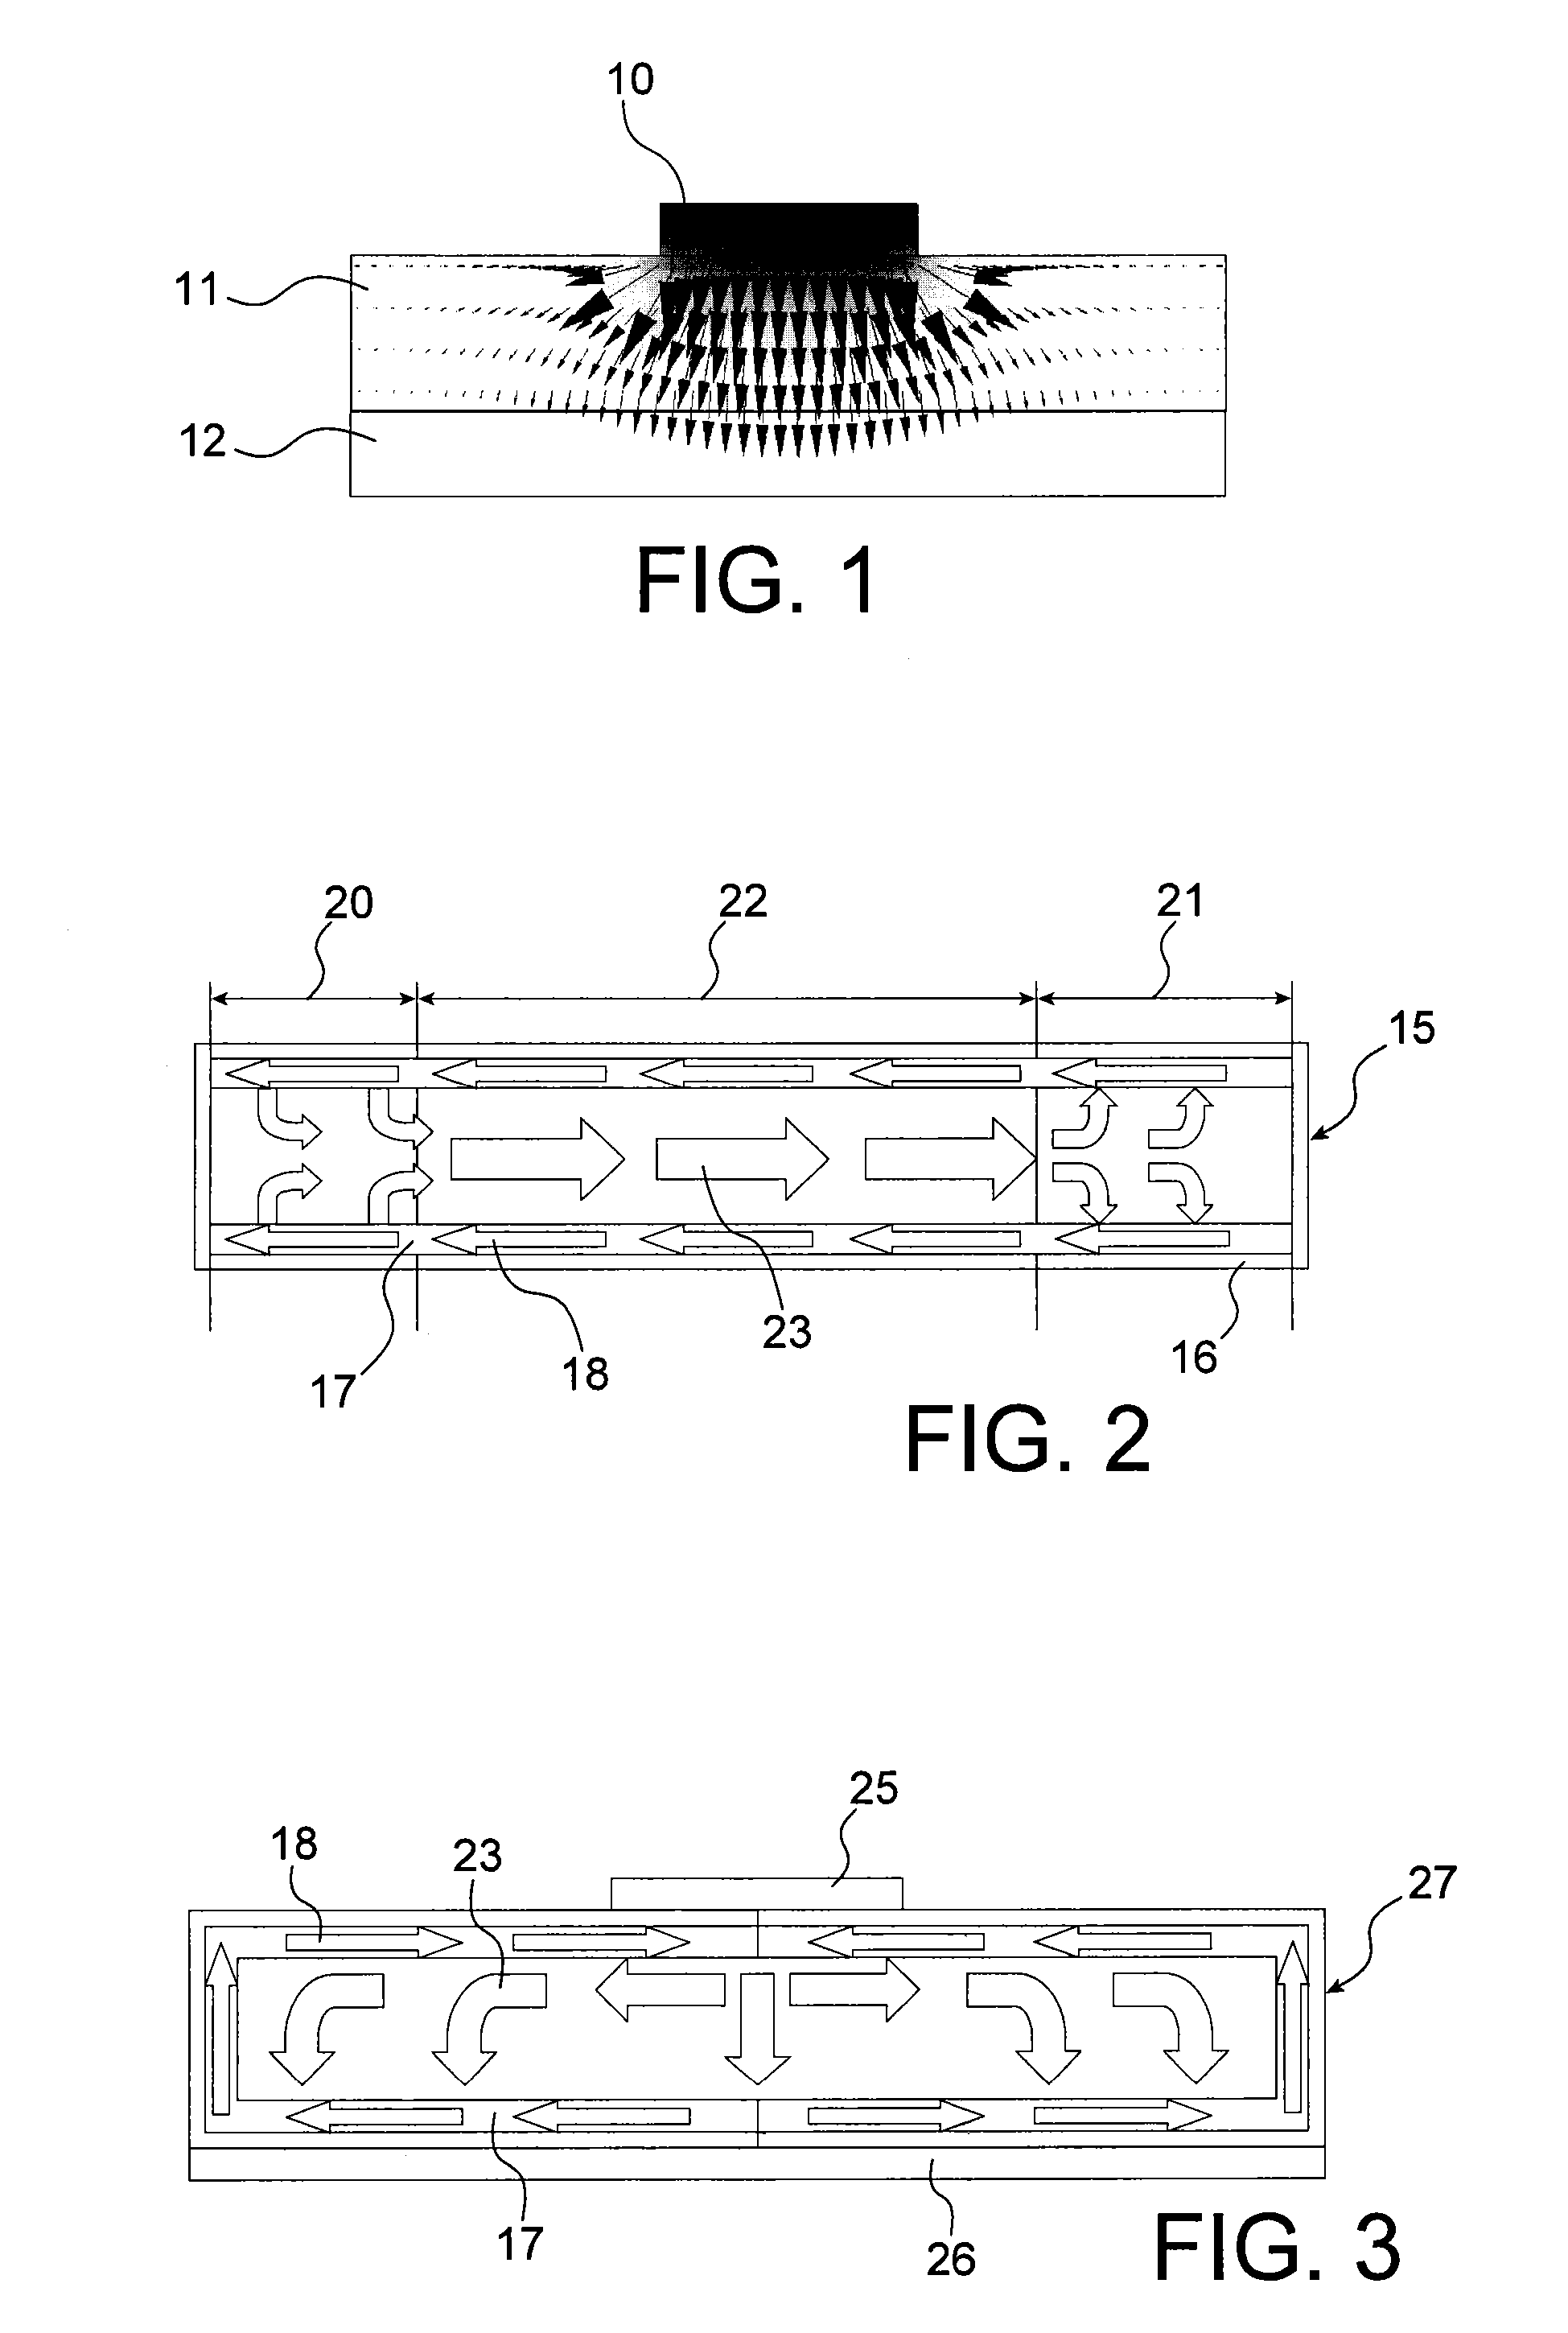 Electronic device with cooling by a liquid metal spreader